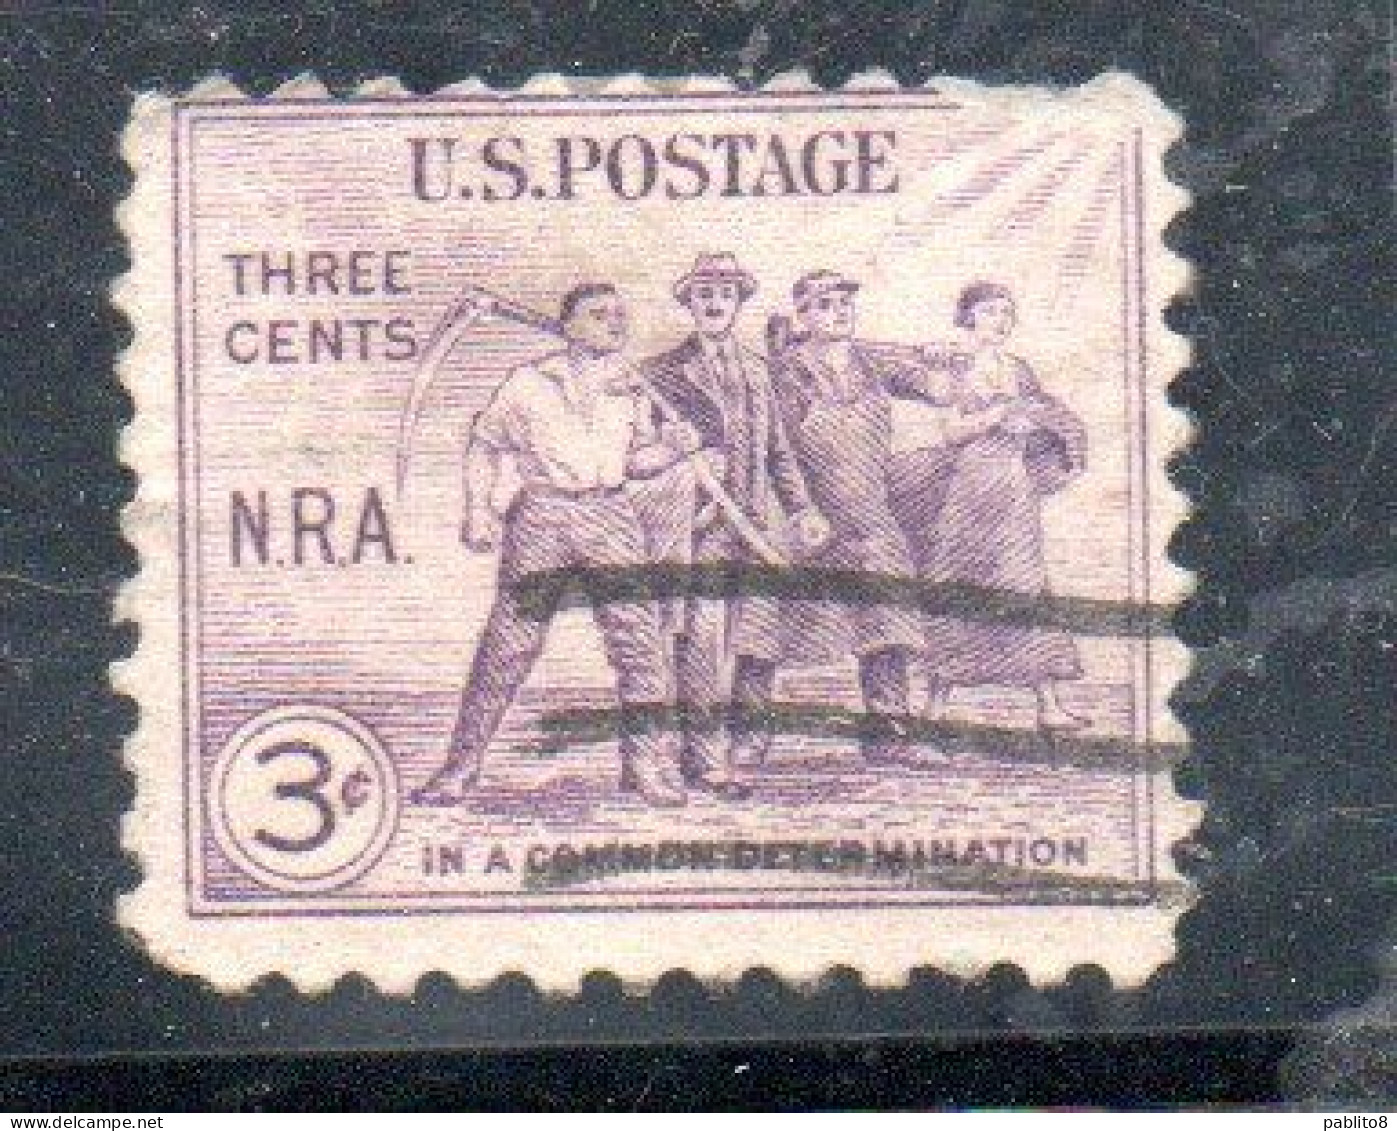 USA STATI UNITI 1933 NATIONAL RECOVERY ACT ISSUE NRA GROUP OF WORKERS CENT 3c STRIP USED USATO OBLITERE' - Gebruikt